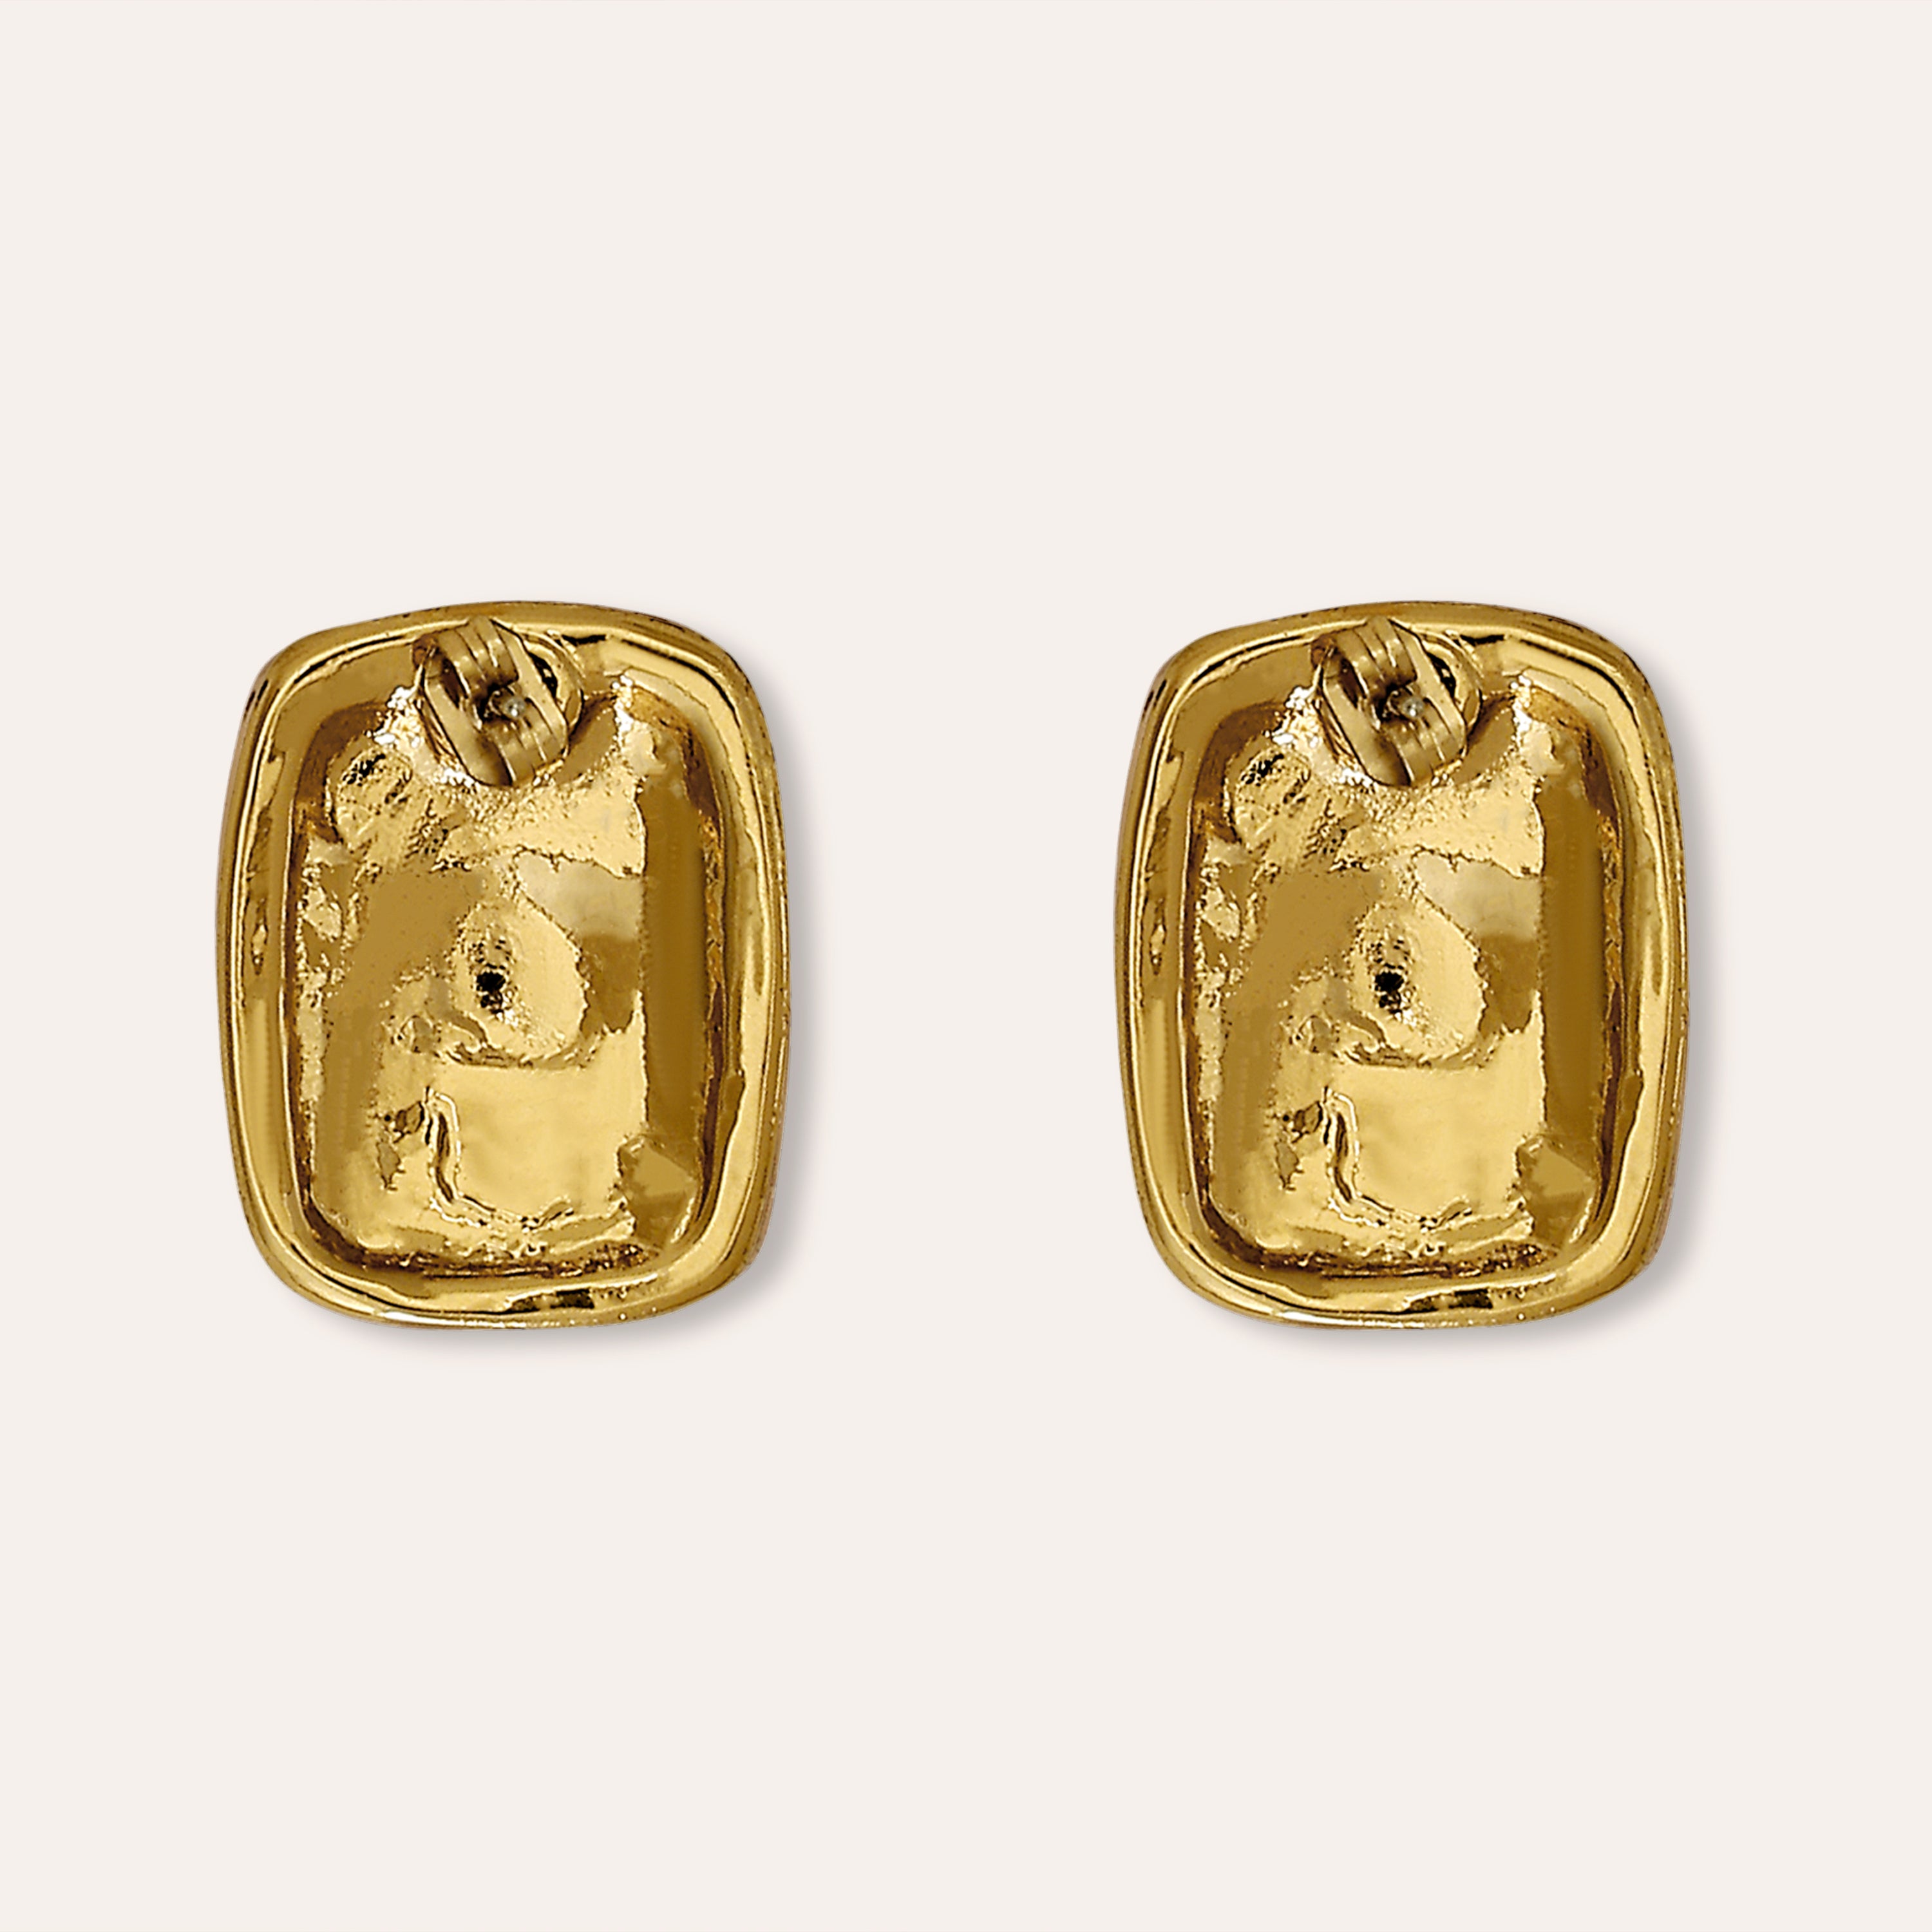 TFC Italian Pattern Gold Plated stud Earrings- Discover daily wear gold earrings including stud earrings, hoop earrings, and pearl earrings, perfect as earrings for women and earrings for girls.Find the cheapest fashion jewellery which is anti-tarnis​h only at The Fun company